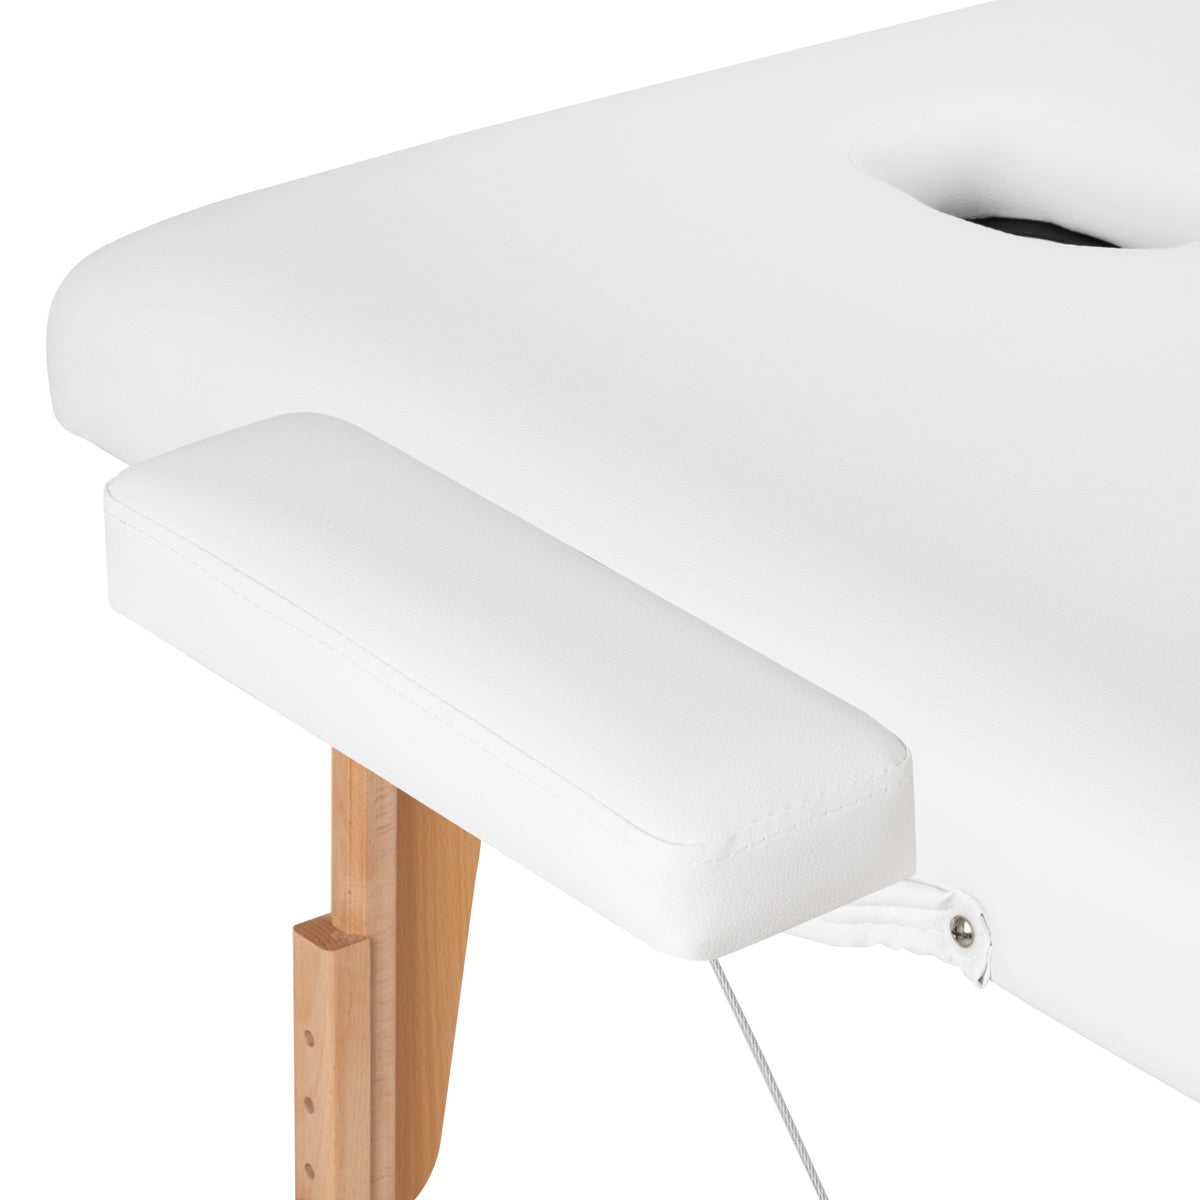 WOODEN FOLDING TABLE FOR MASSAGE COMFORT ACTIVFIZJO LUX 3 SECTIONS 190X70 WHITE